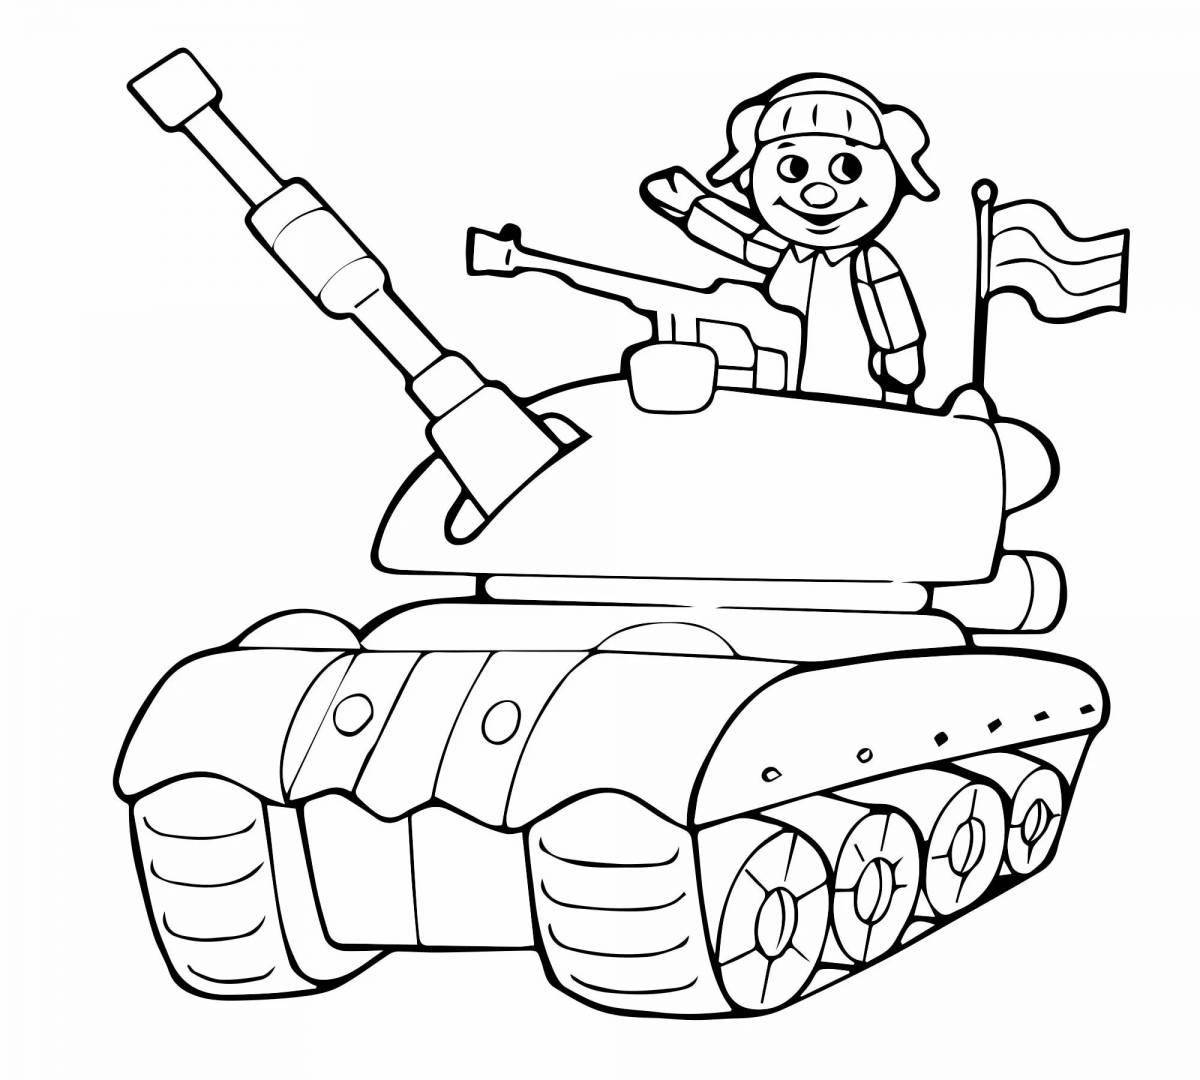 Charming defender of the fatherland coloring book for children